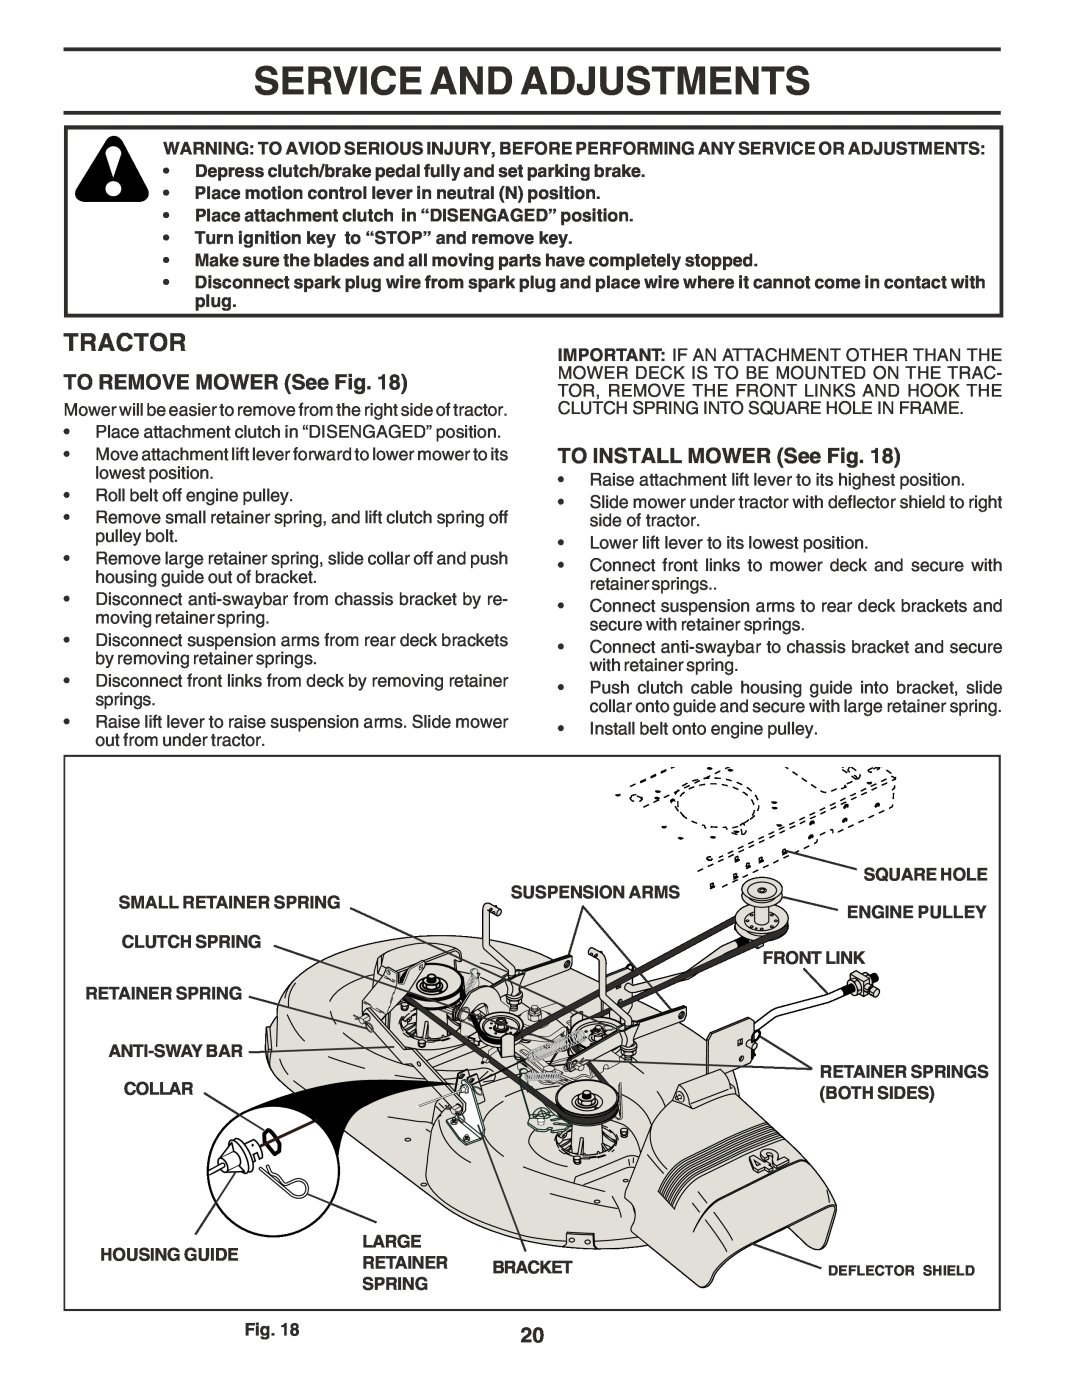 Poulan 182770 owner manual Service And Adjustments, TO REMOVE MOWER See Fig, TO INSTALL MOWER See Fig, Tractor 